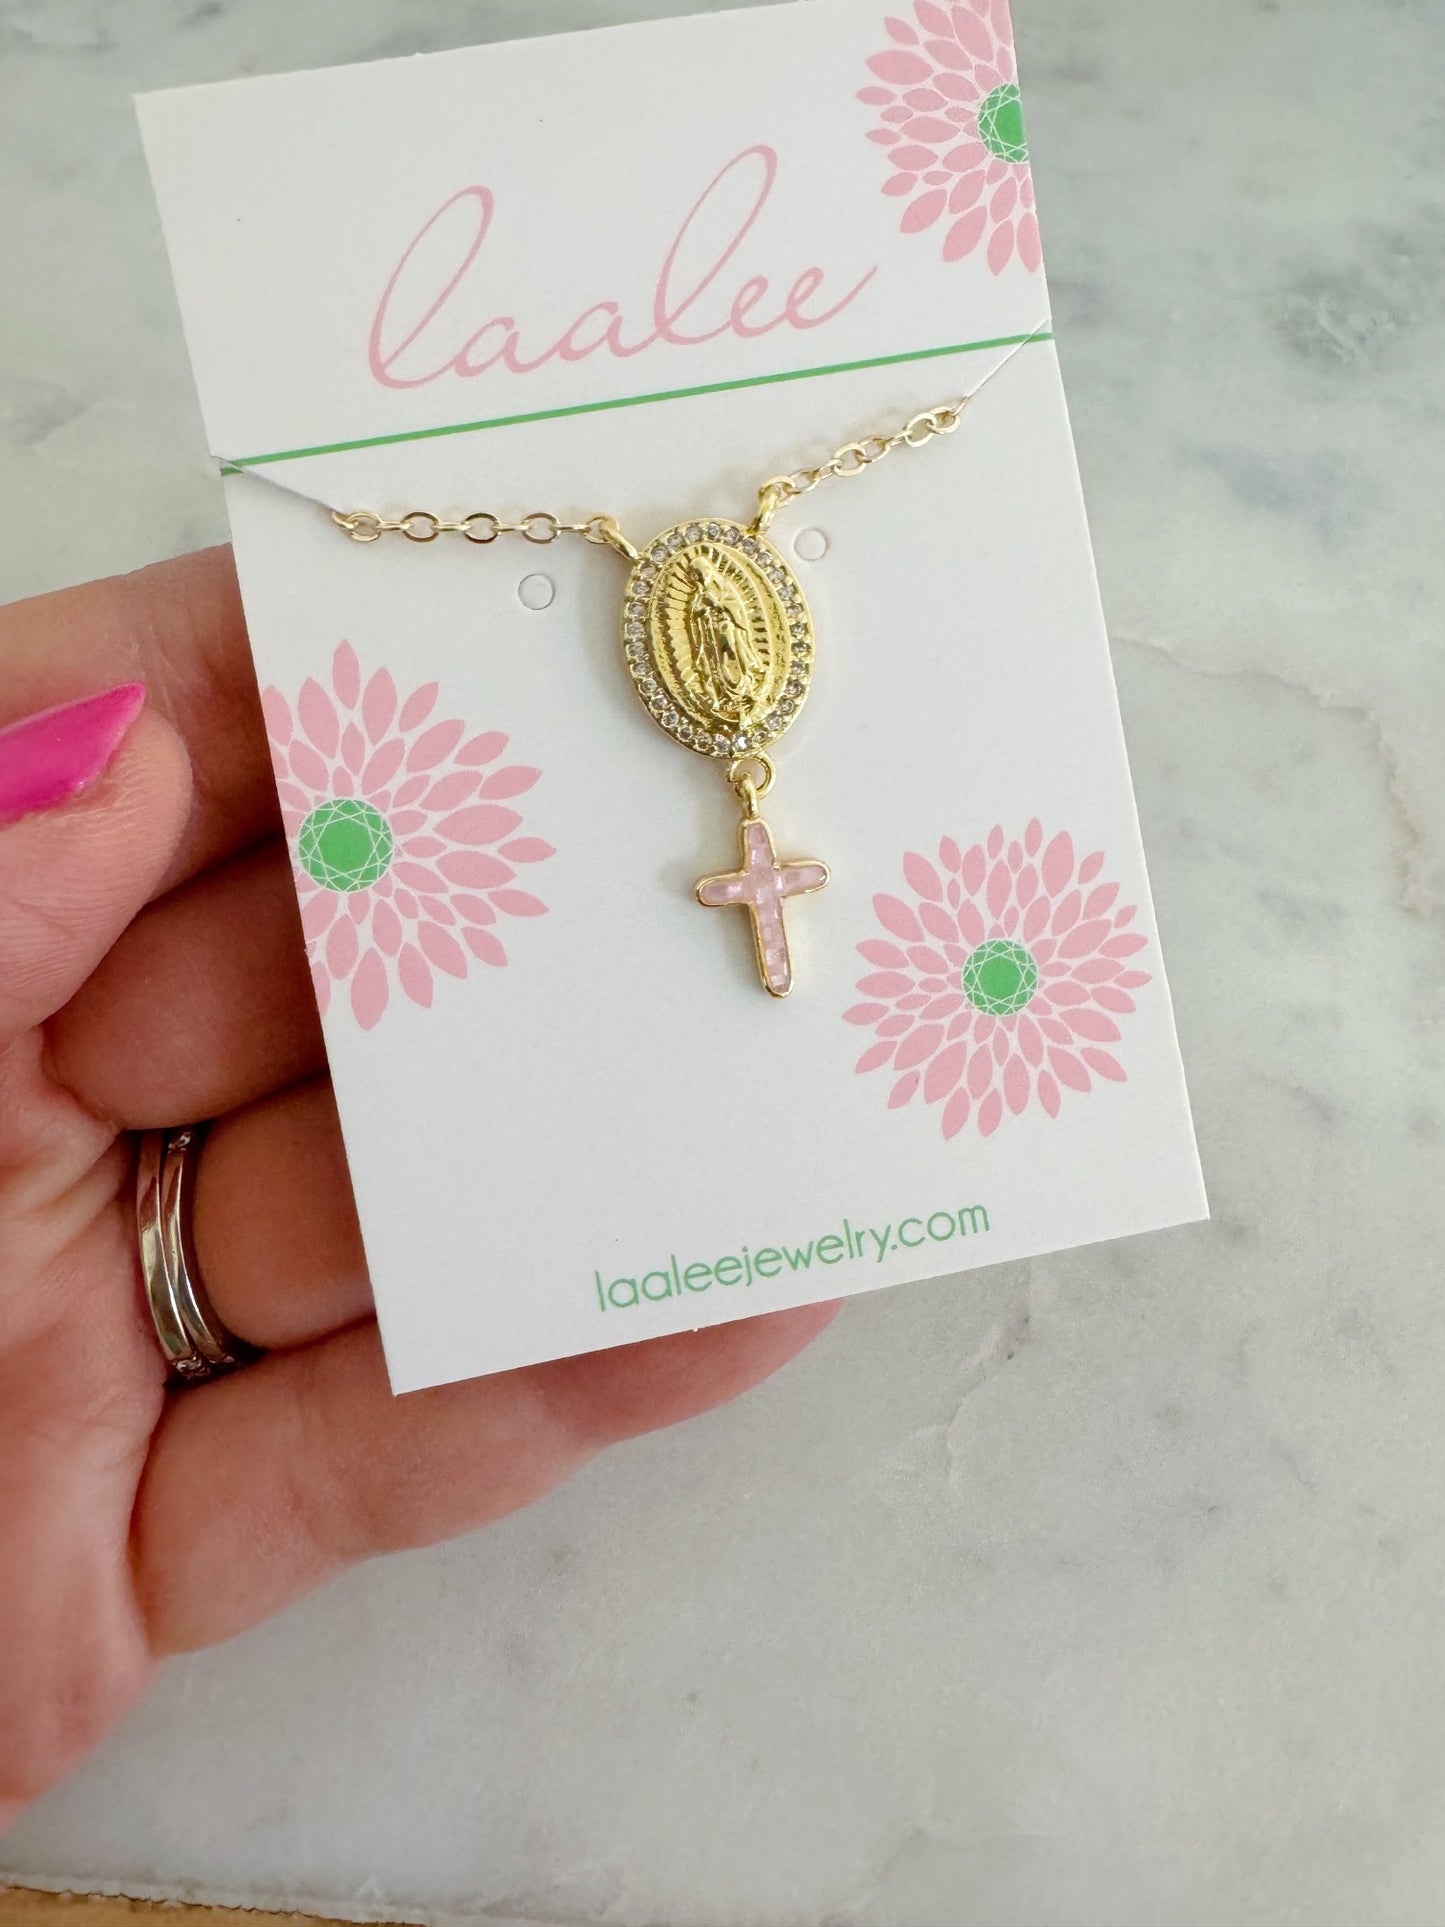 Religious Jewelry, Virgin Mary Necklace, Cross Pendant, 14k Gold Filled Chain